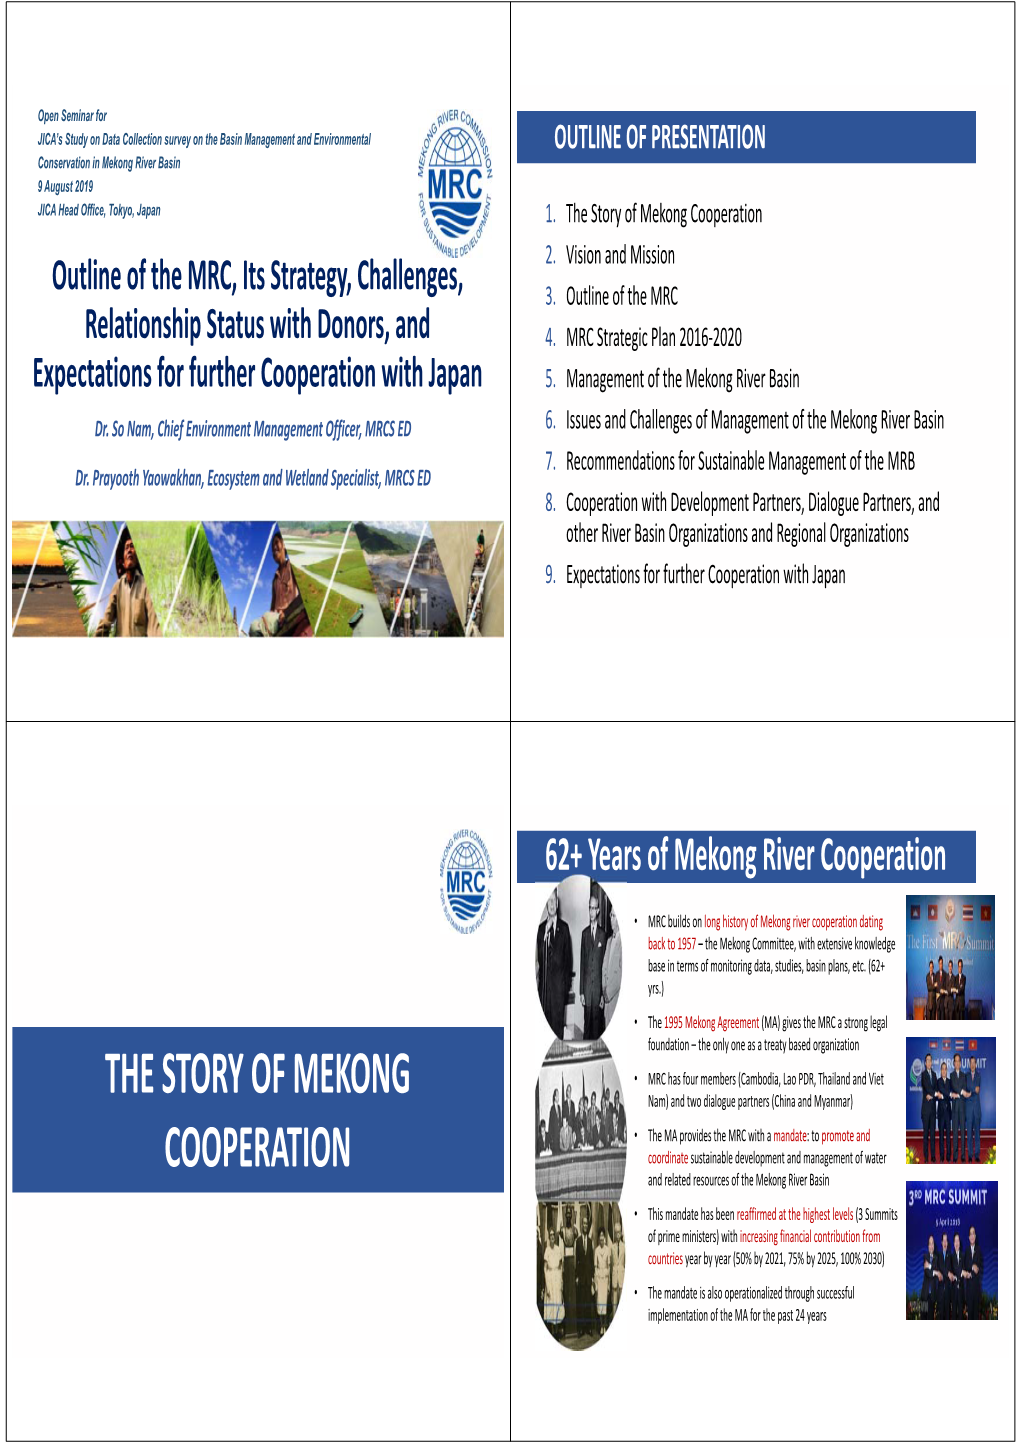 The Story of Mekong Cooperation 2